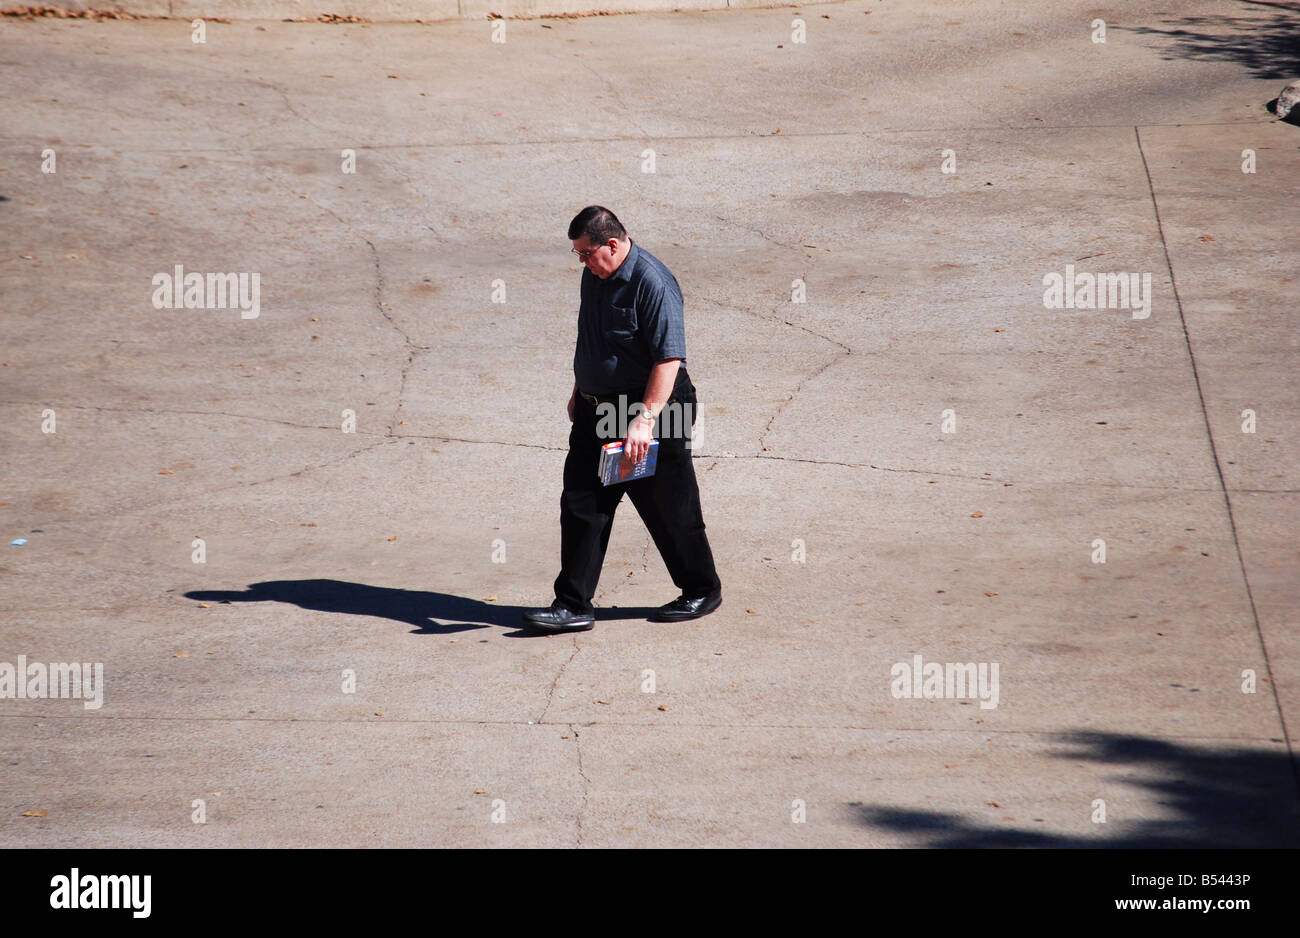 image of a man walking across a library parking lot holding a book Stock Photo